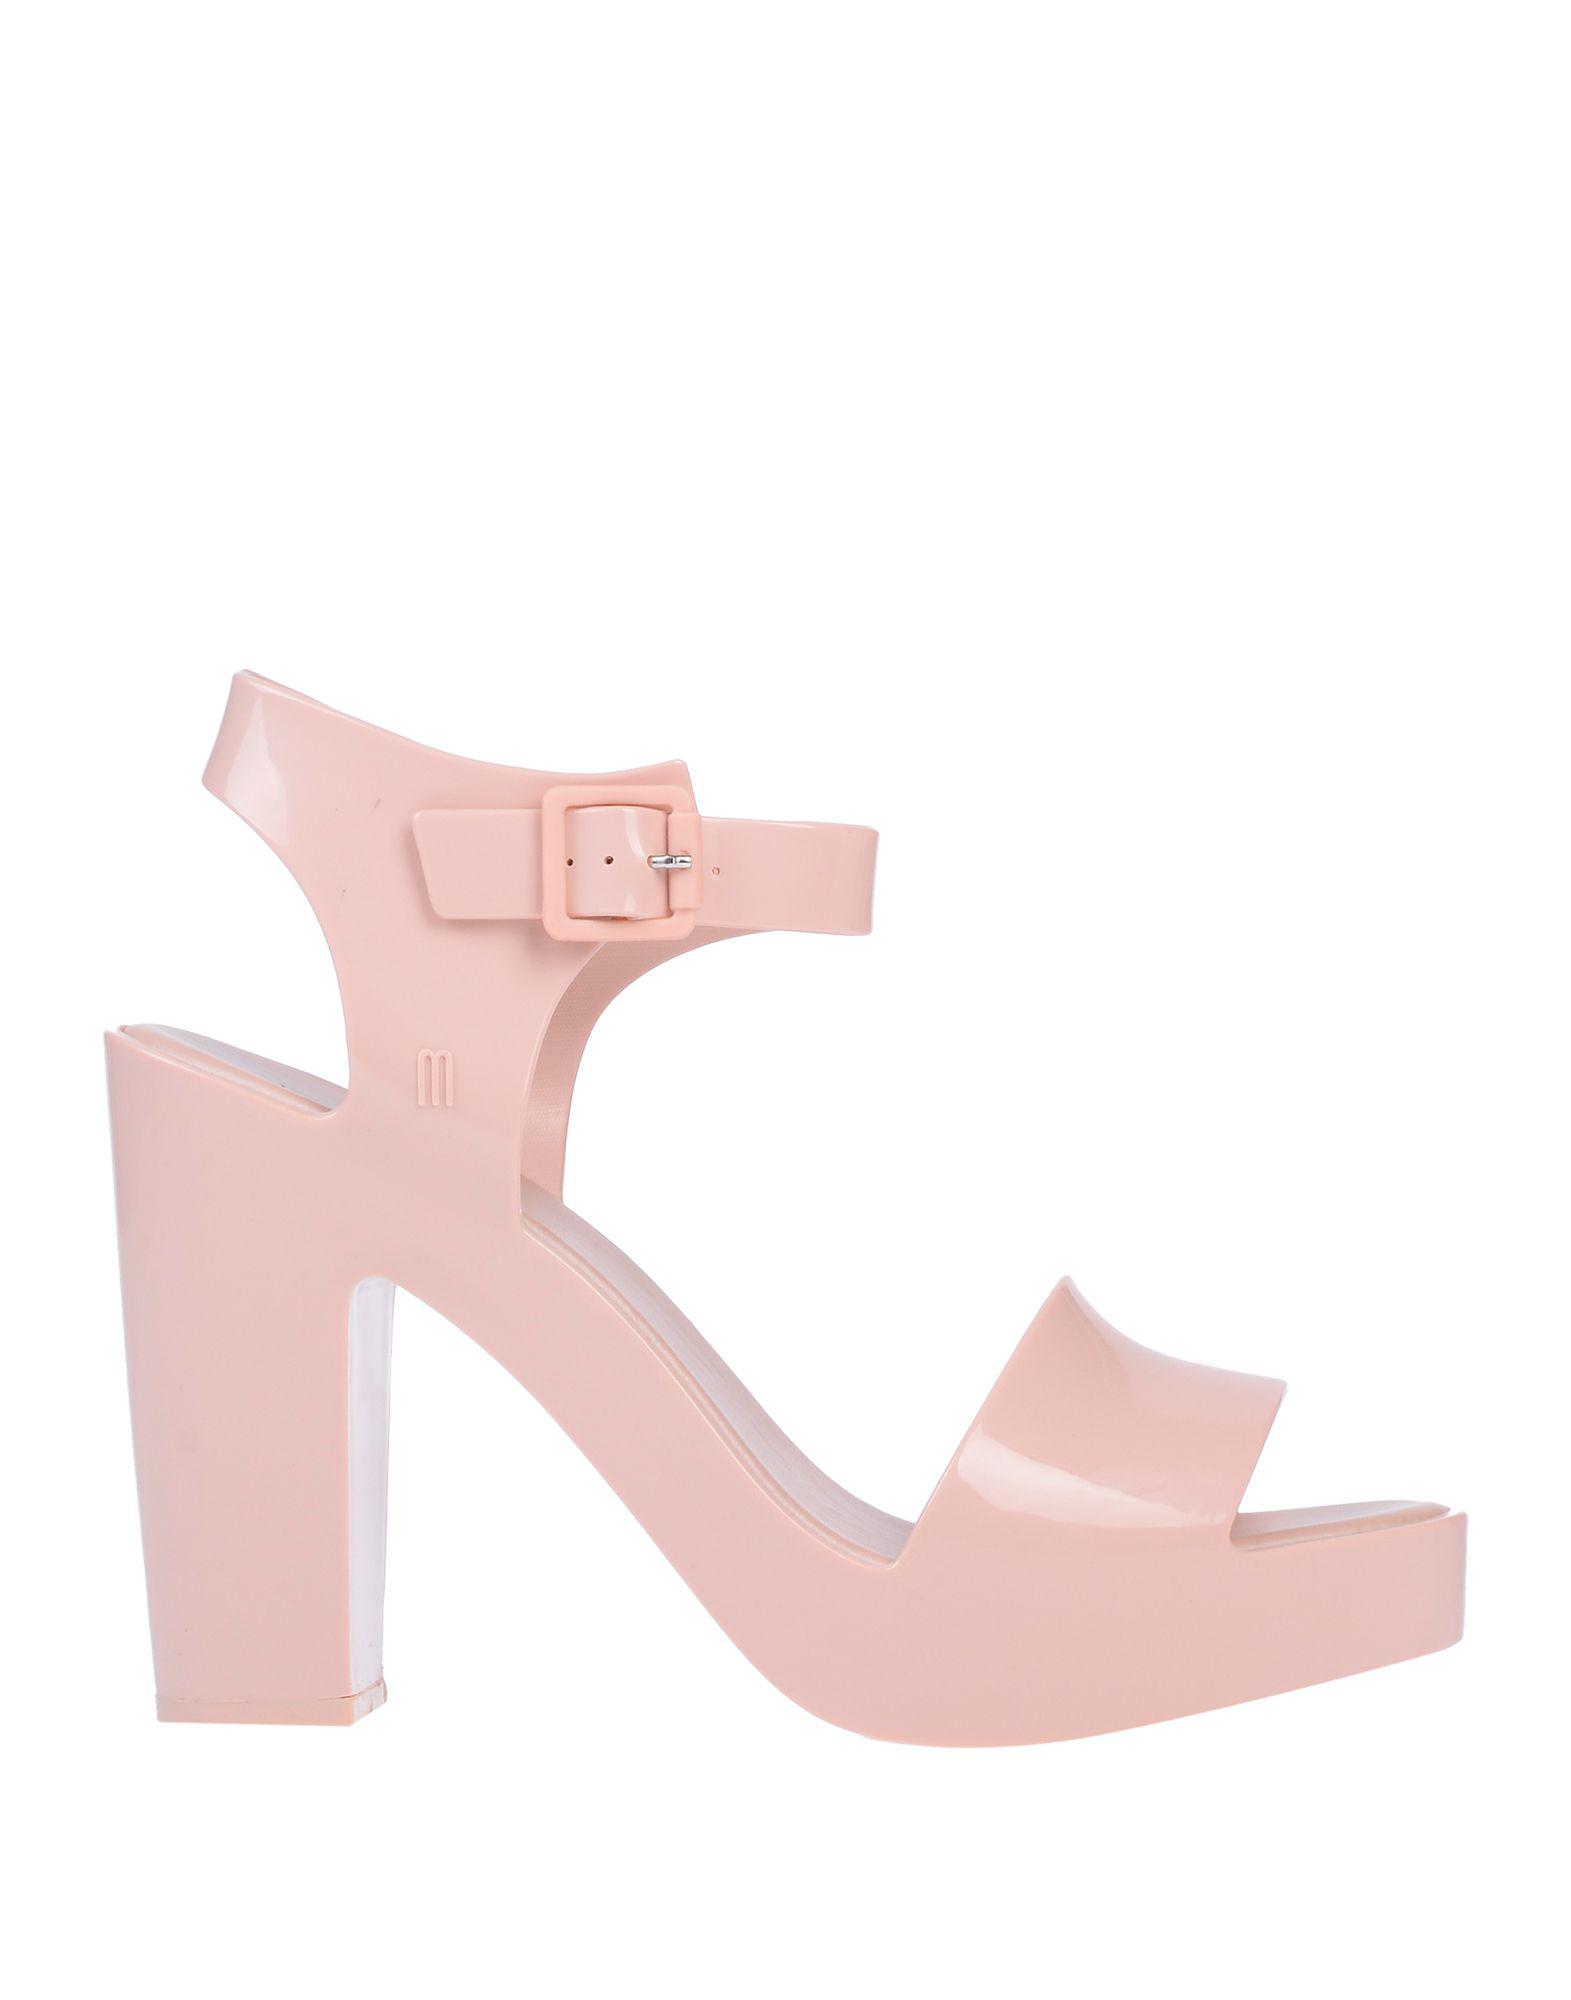 Melissa Rubber Sandals in Pale Pink (Pink) - Lyst